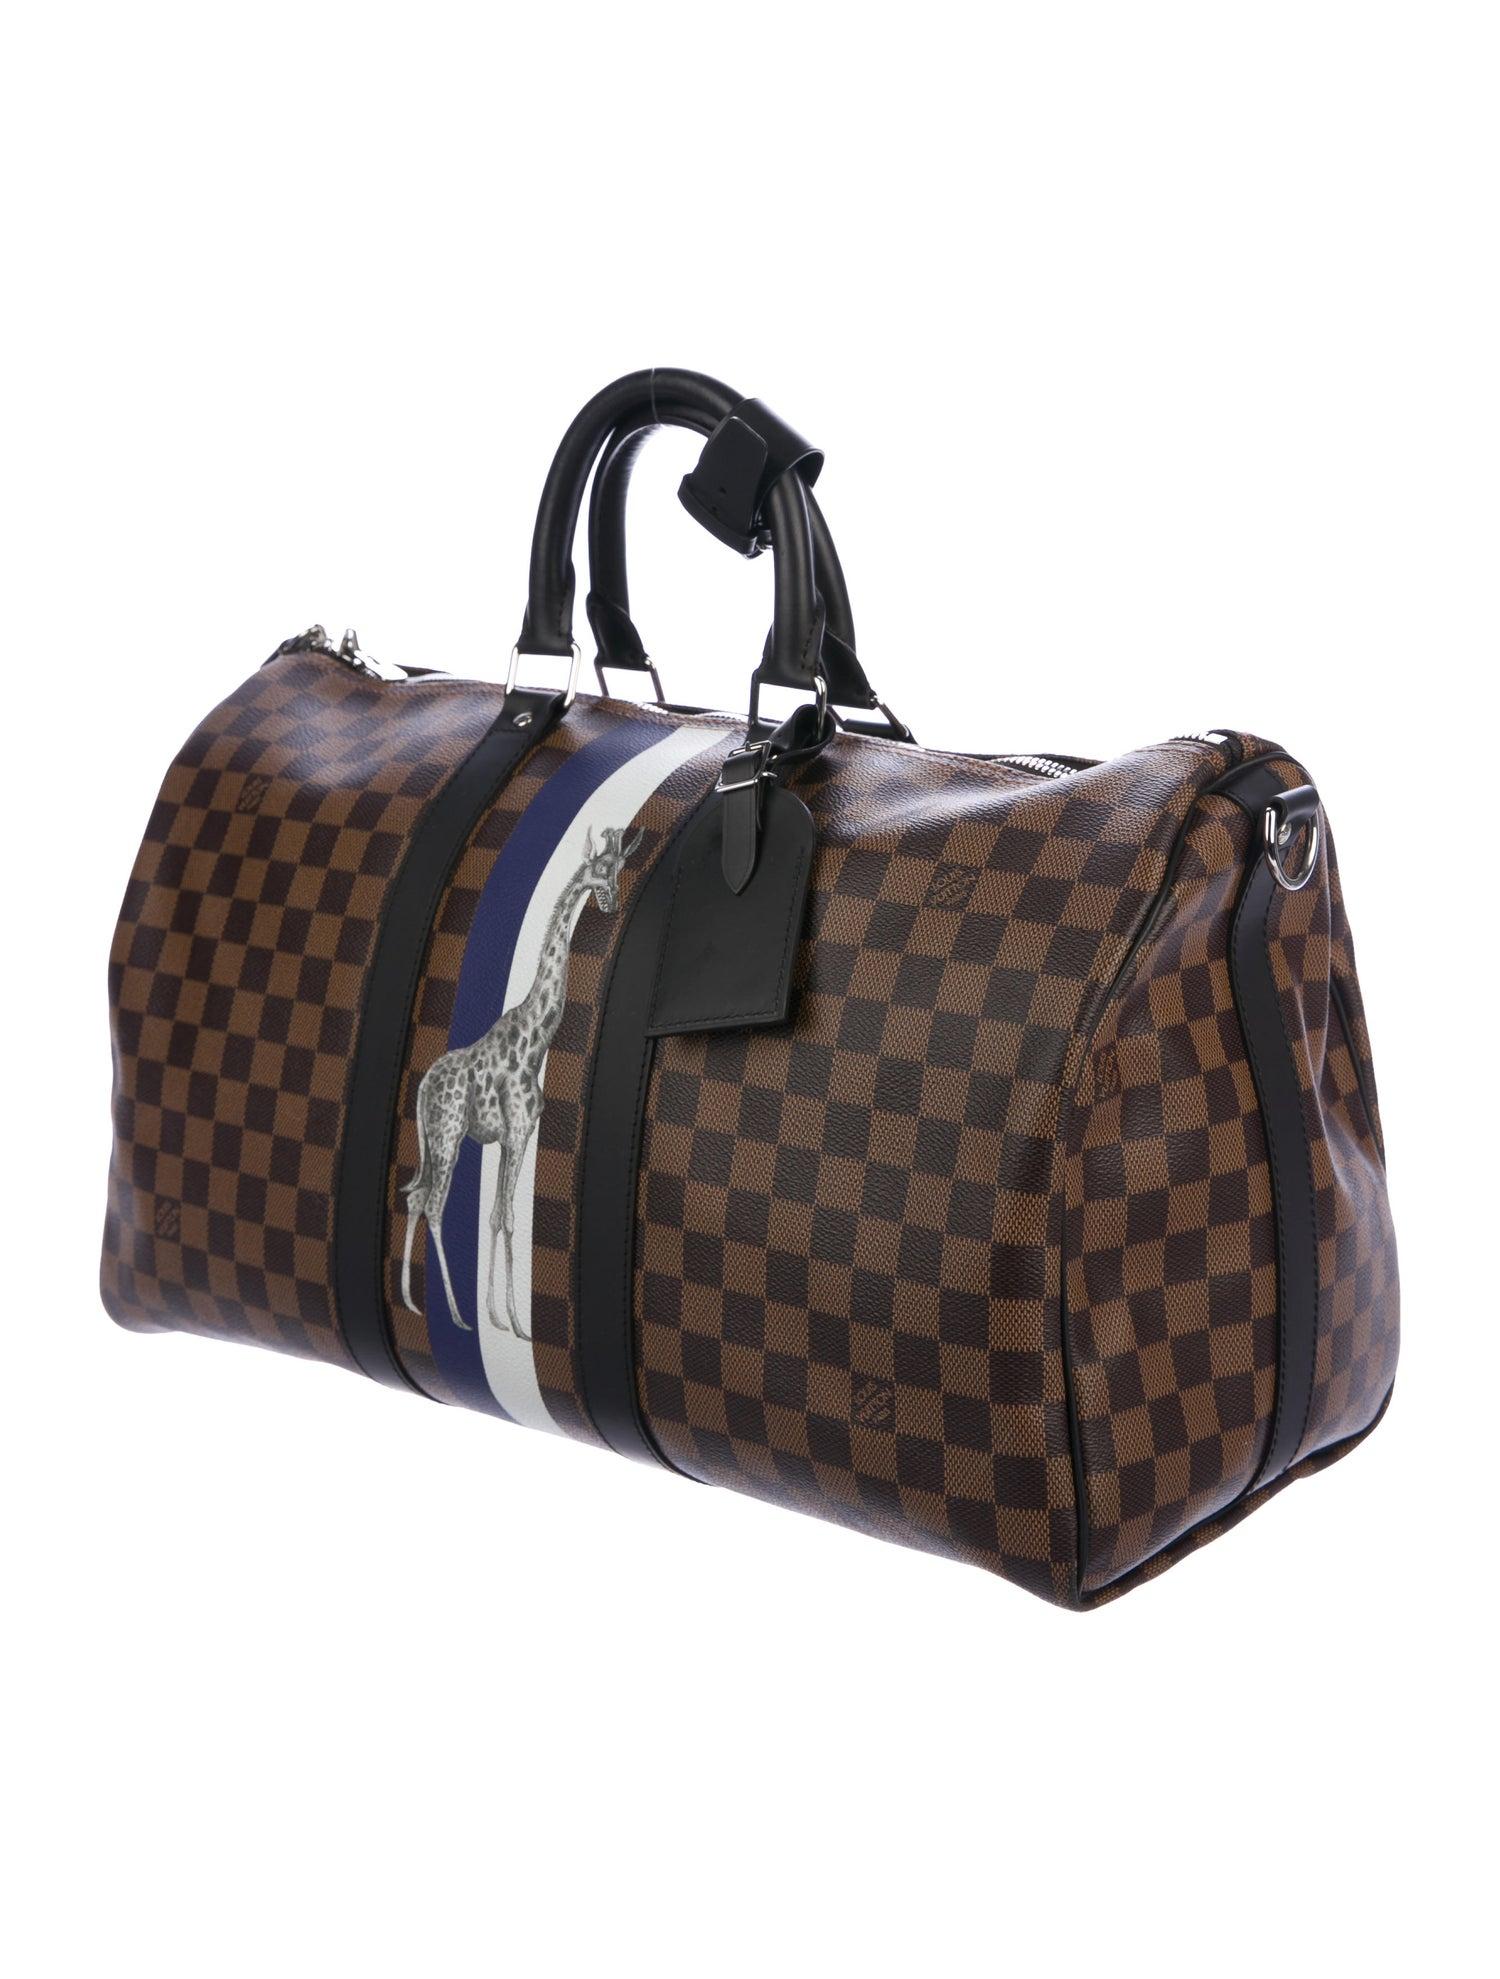 Louis Vuitton NEW Monogram Brown Keepall Top Handle Men's Women's Travel Duffle Bag

Monogram canvas 
Leather
Silver-tone hardware
Woven lining
Zipper closure
Made in France
Handle drop 4